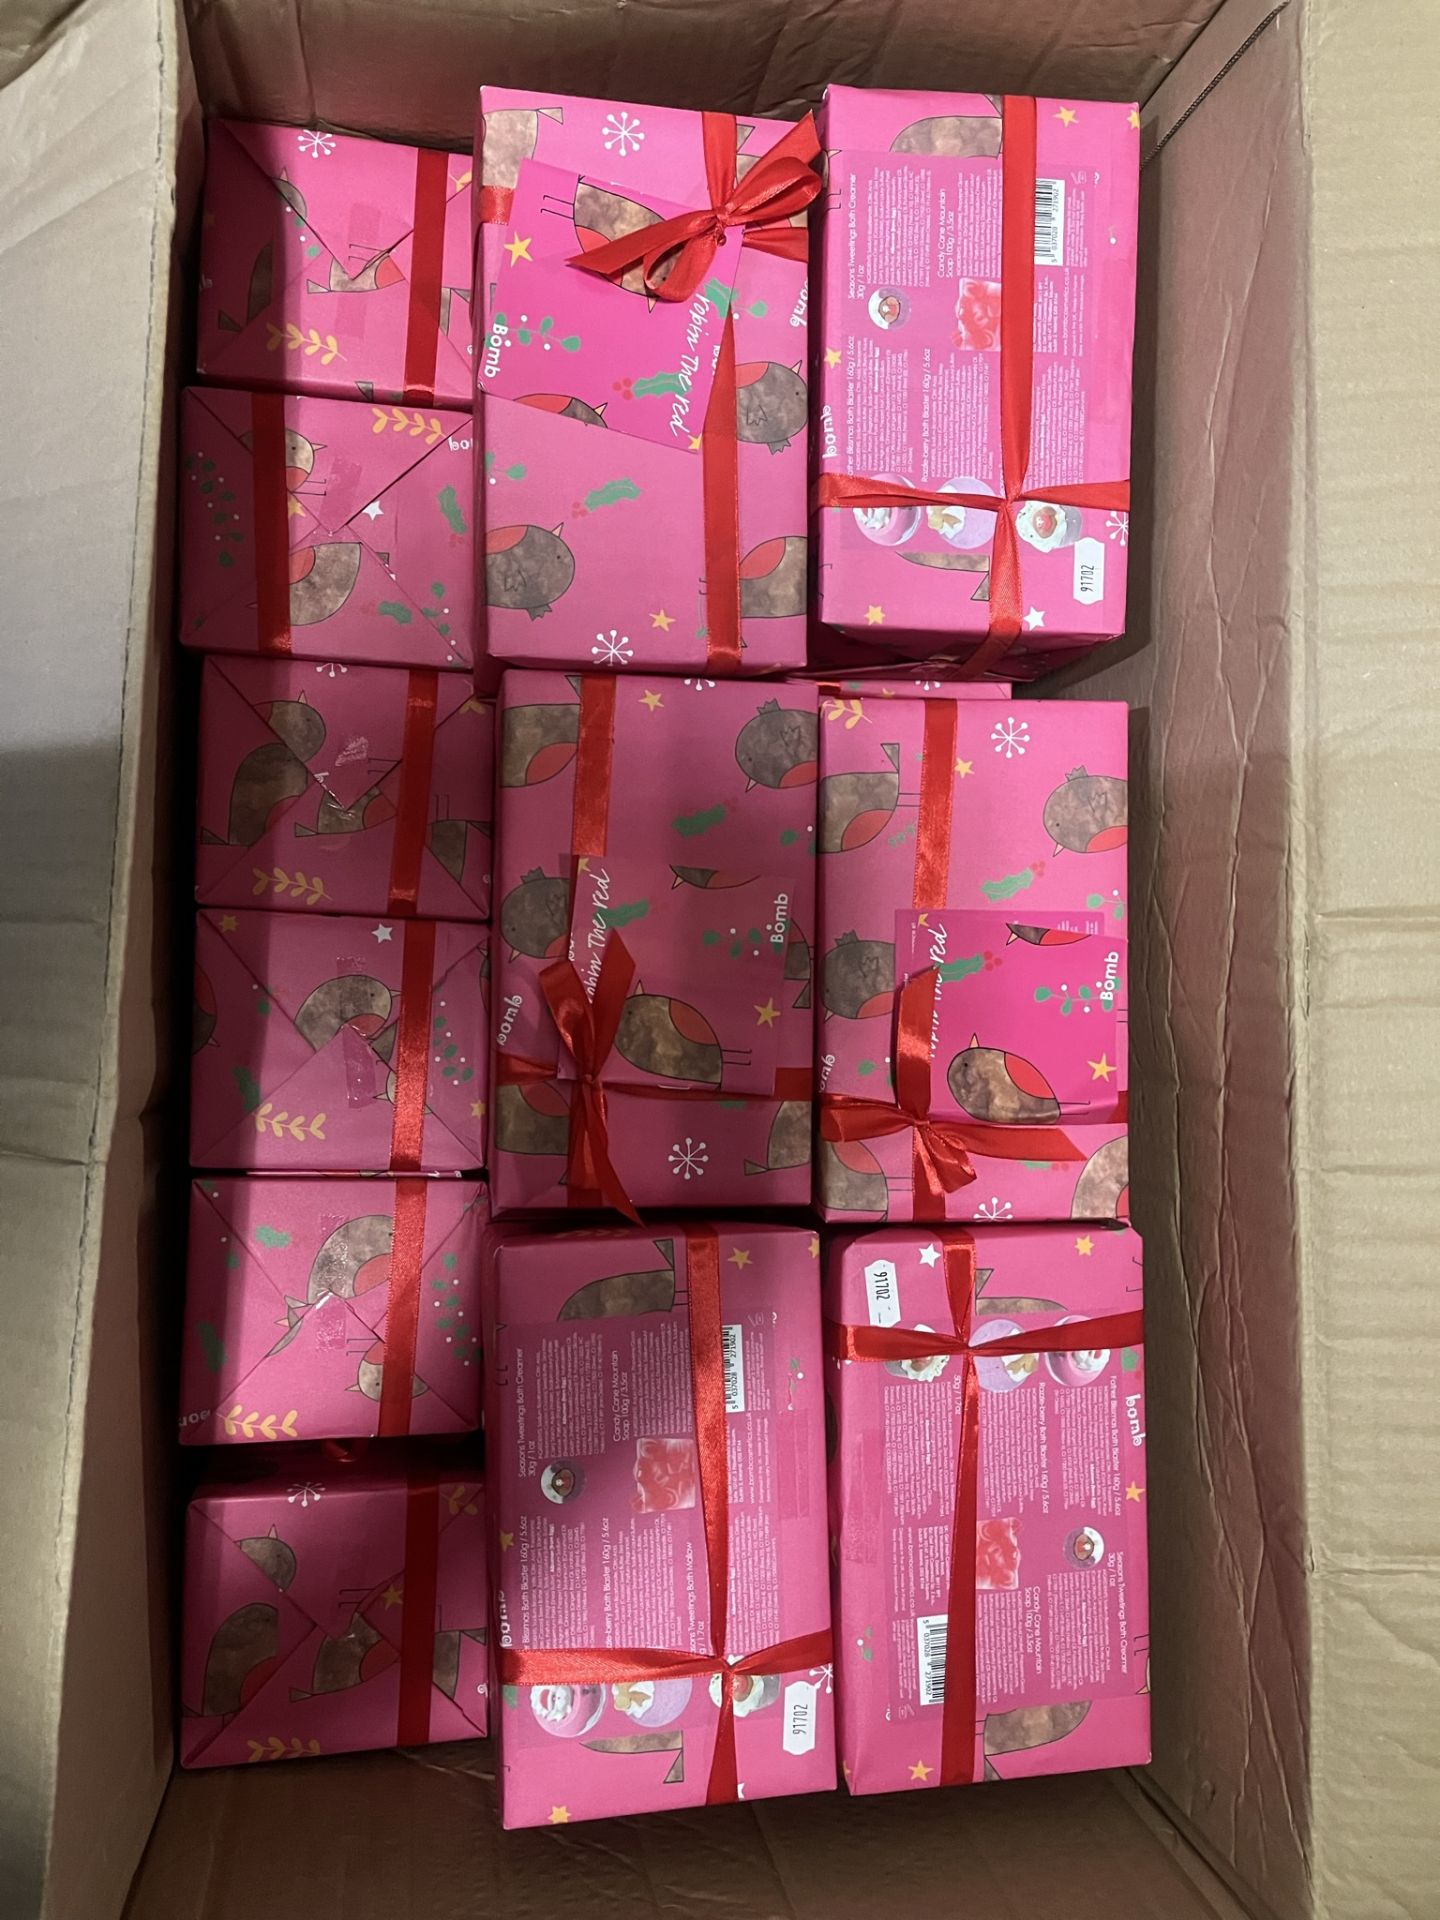 26 x Boxes Of Bomb Cosmetics Gift Wrapped Bath Bombs - Image 6 of 6